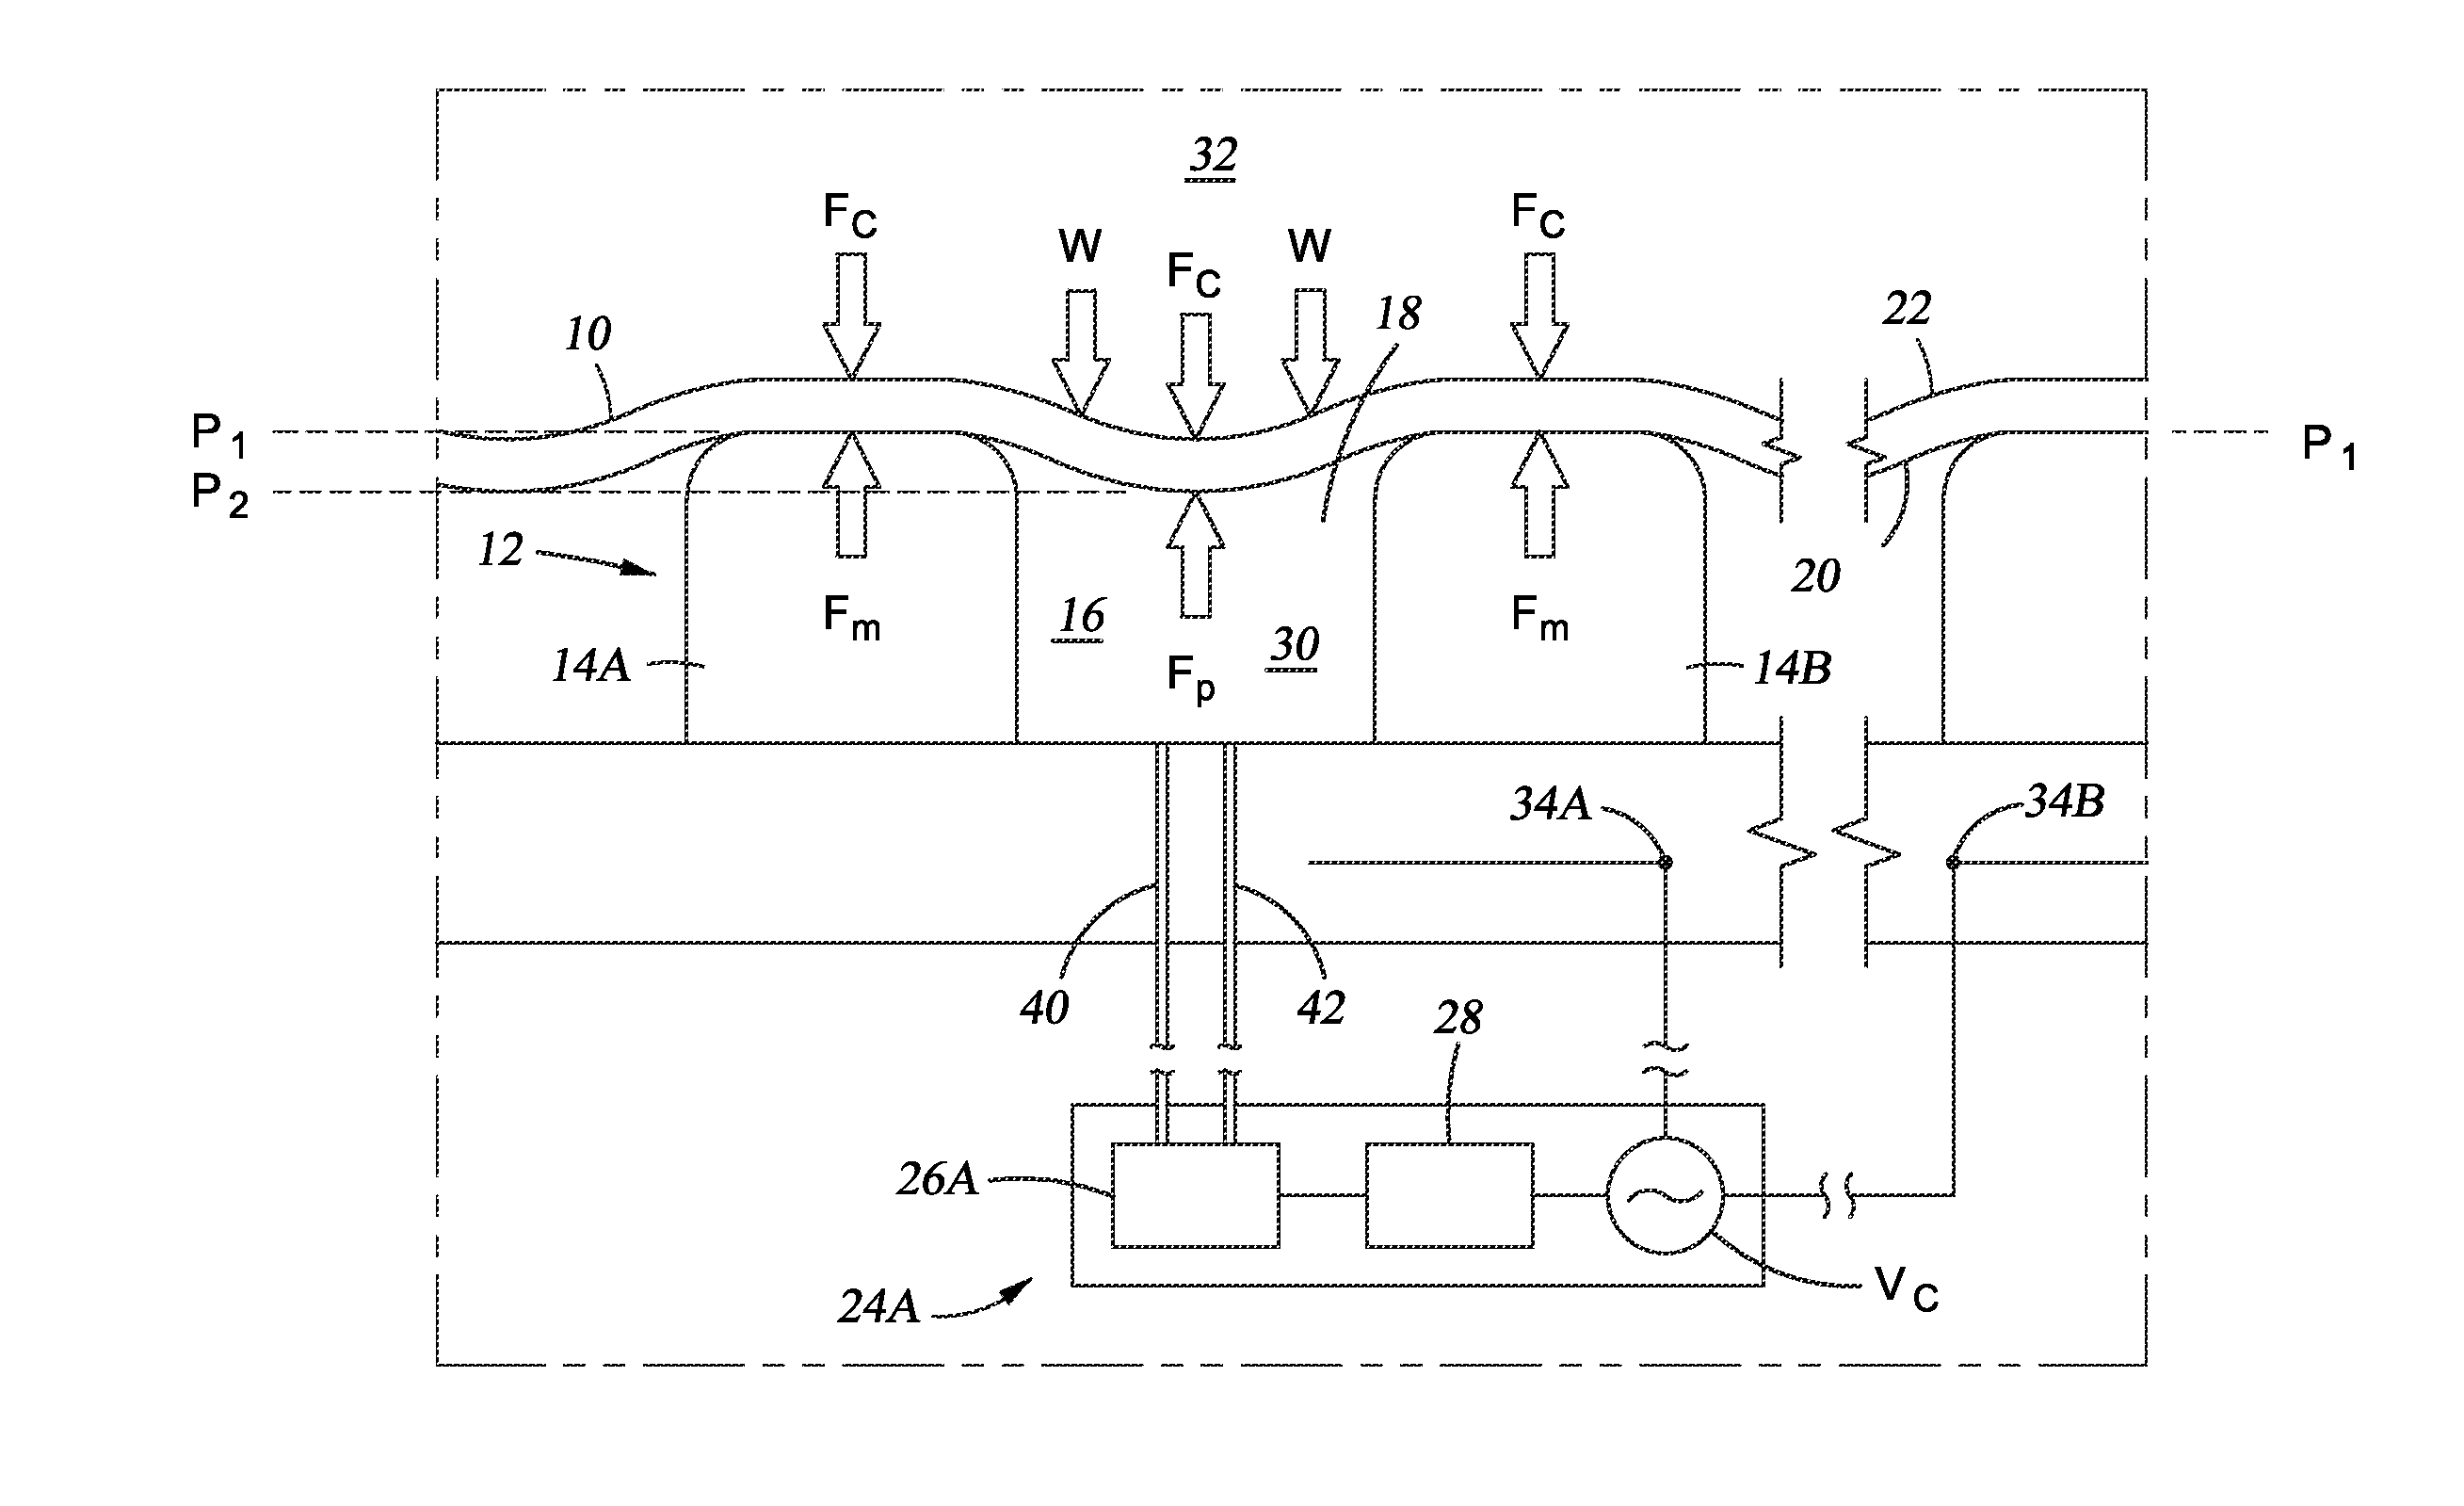 Control systems employing deflection sensors to control clamping forces applied by electrostatic chucks, and related methods